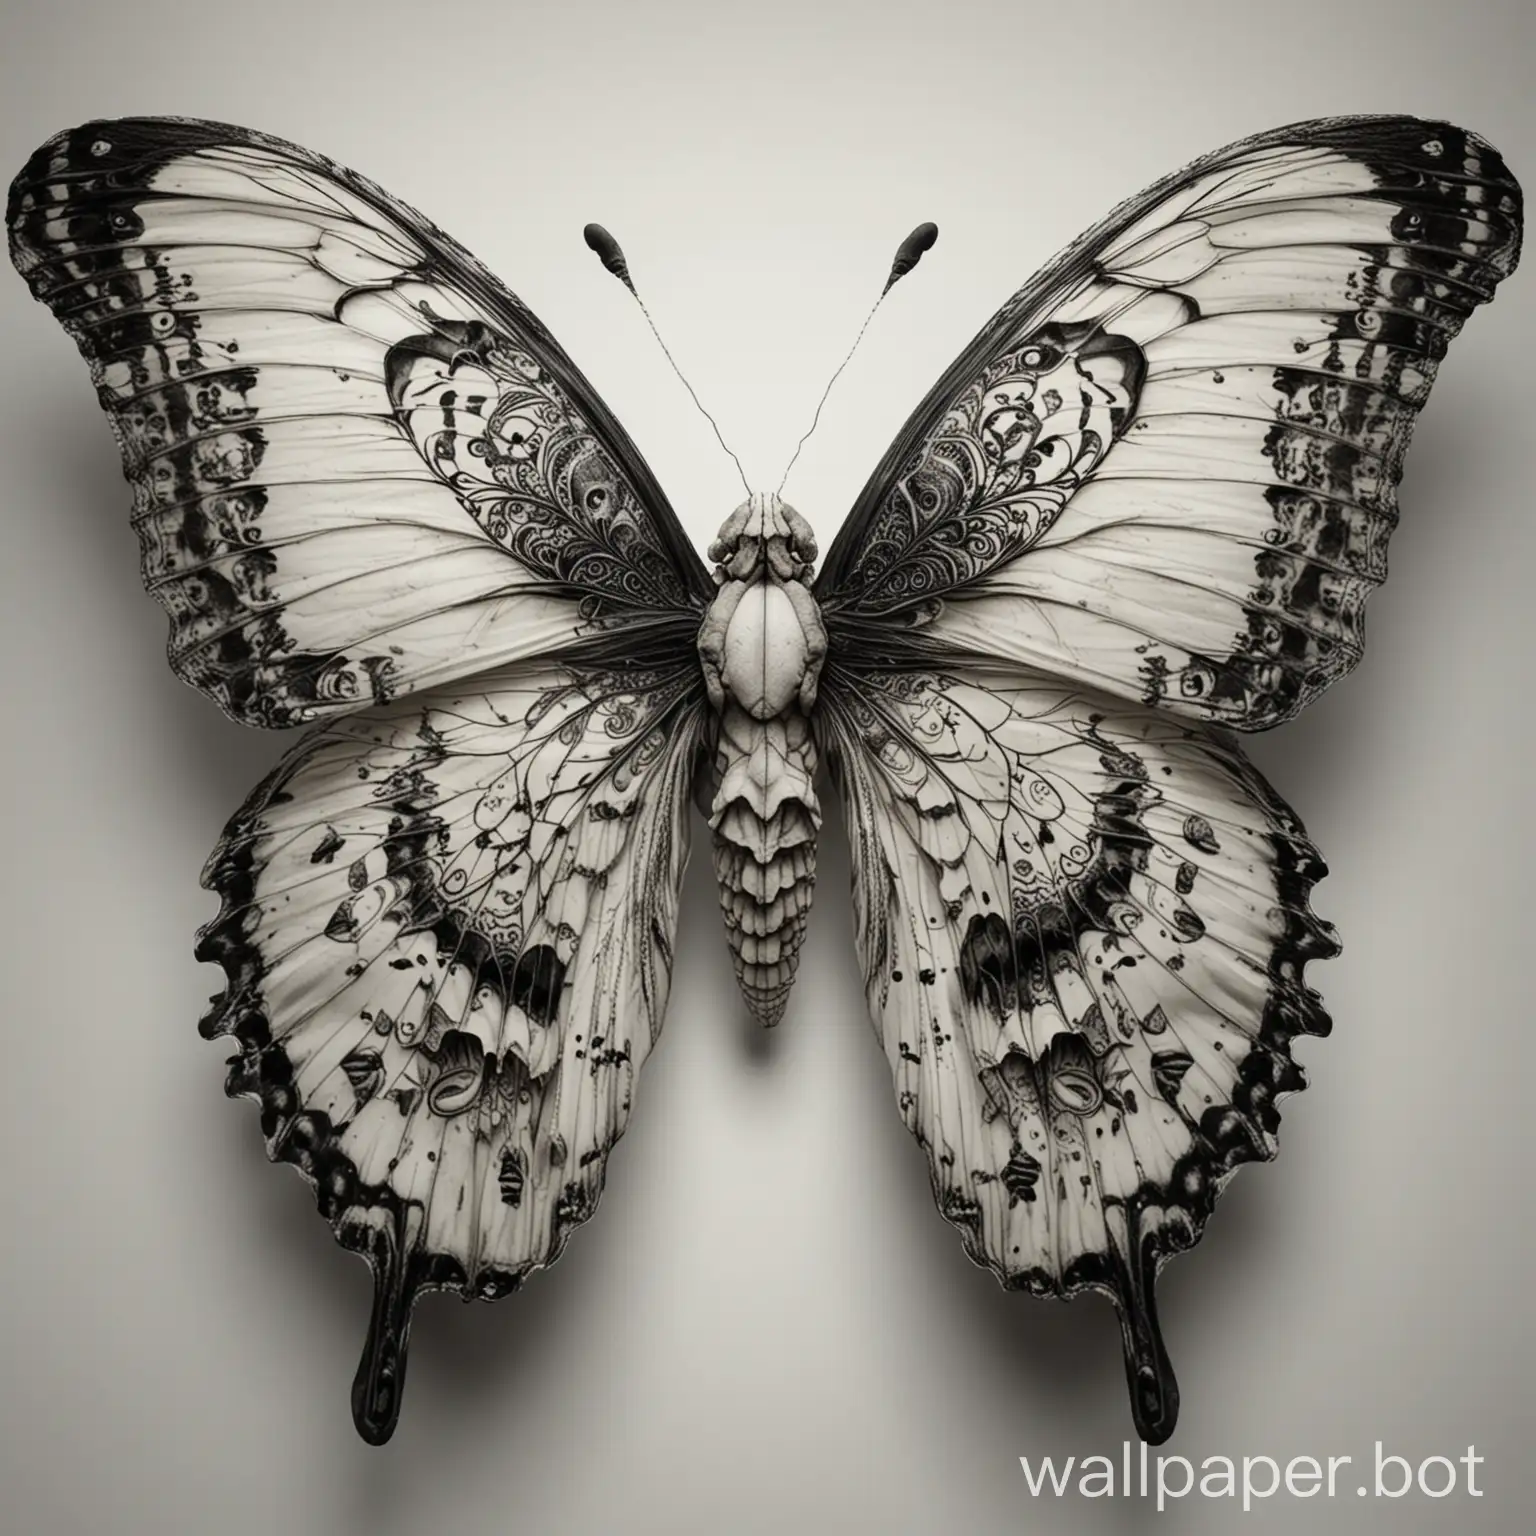 Symmetrical-High-Contrast-Photorealistic-Butterfly-with-Double-Exposure-Human-Skull-Pattern